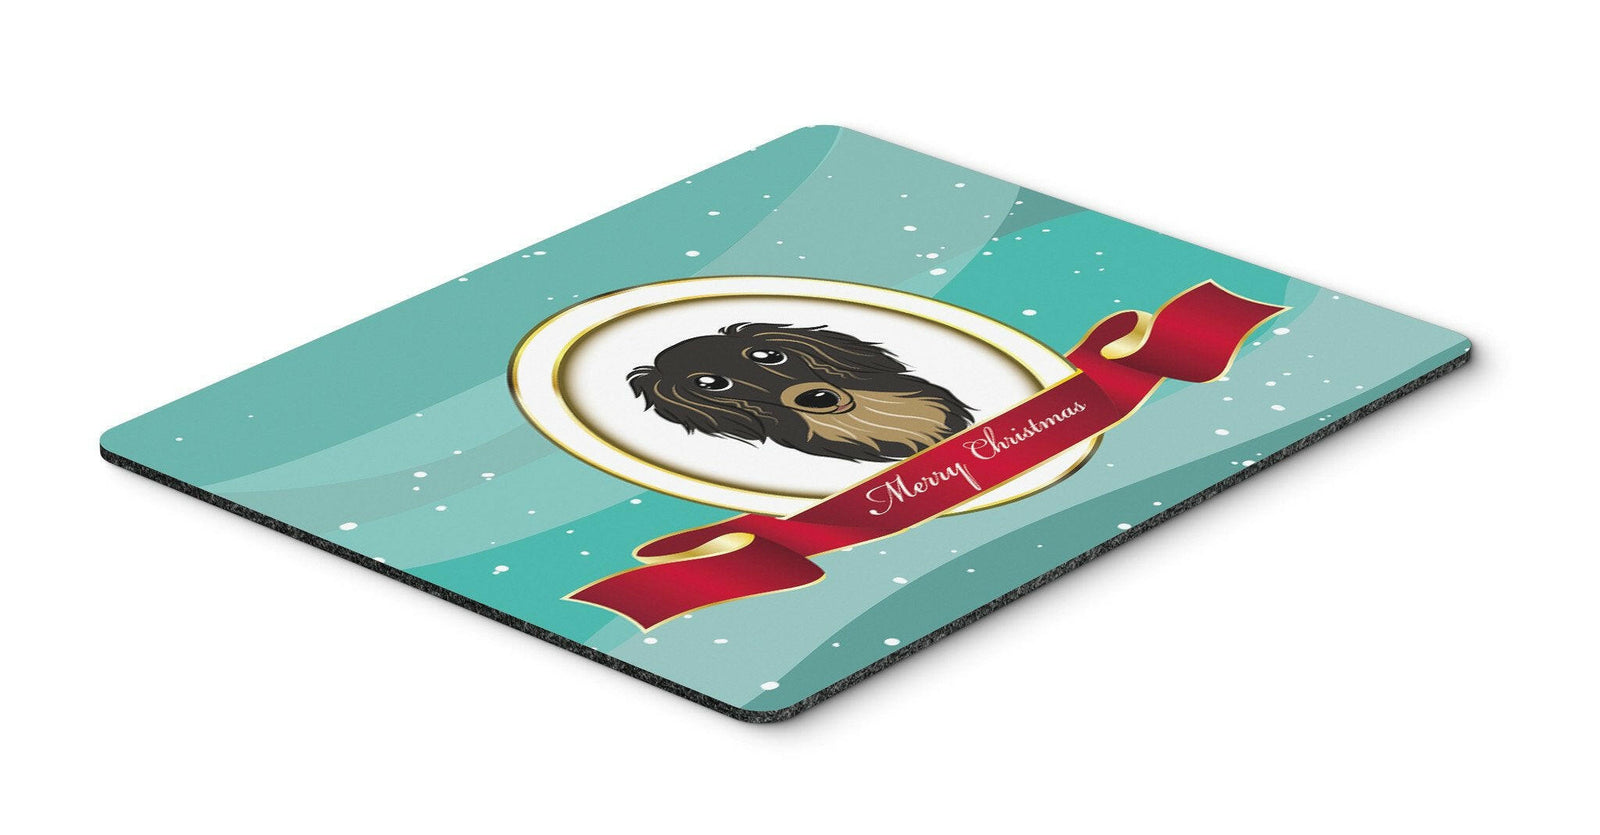 Longhair Black and Tan Dachshund Merry Christmas Mouse Pad, Hot Pad or Trivet BB1523MP by Caroline's Treasures